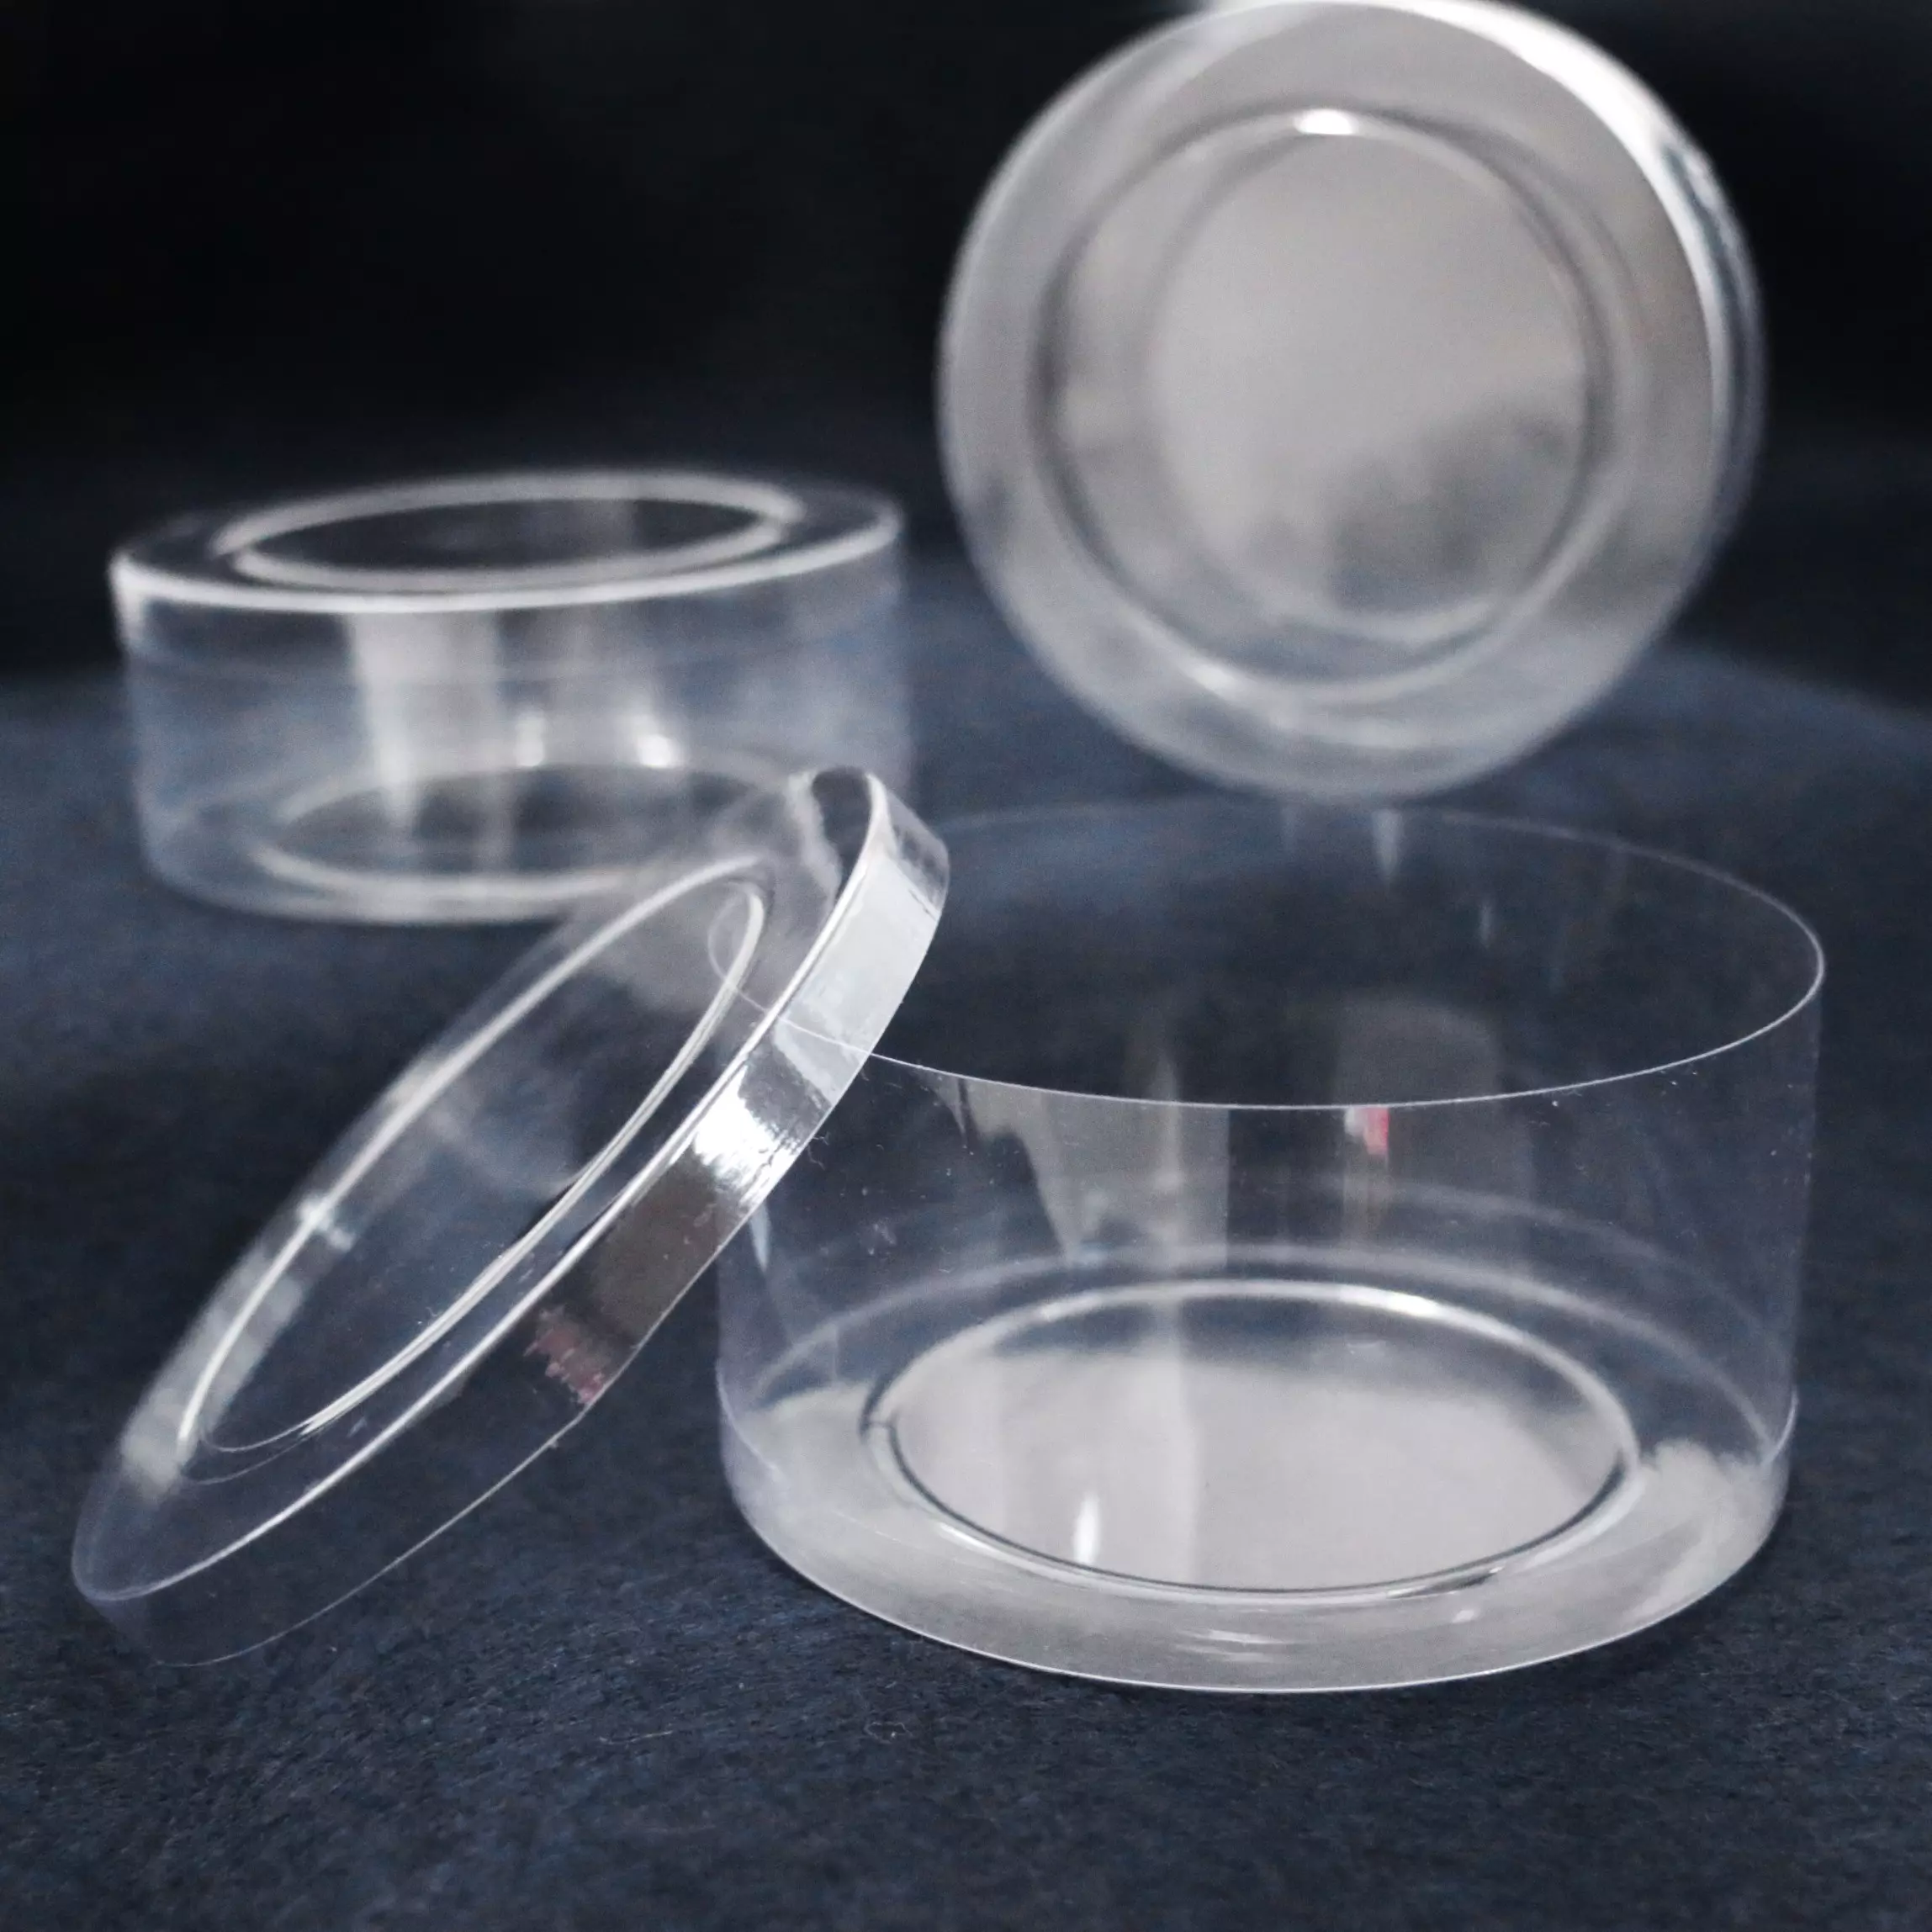 Clear Plastic Containers with Lids